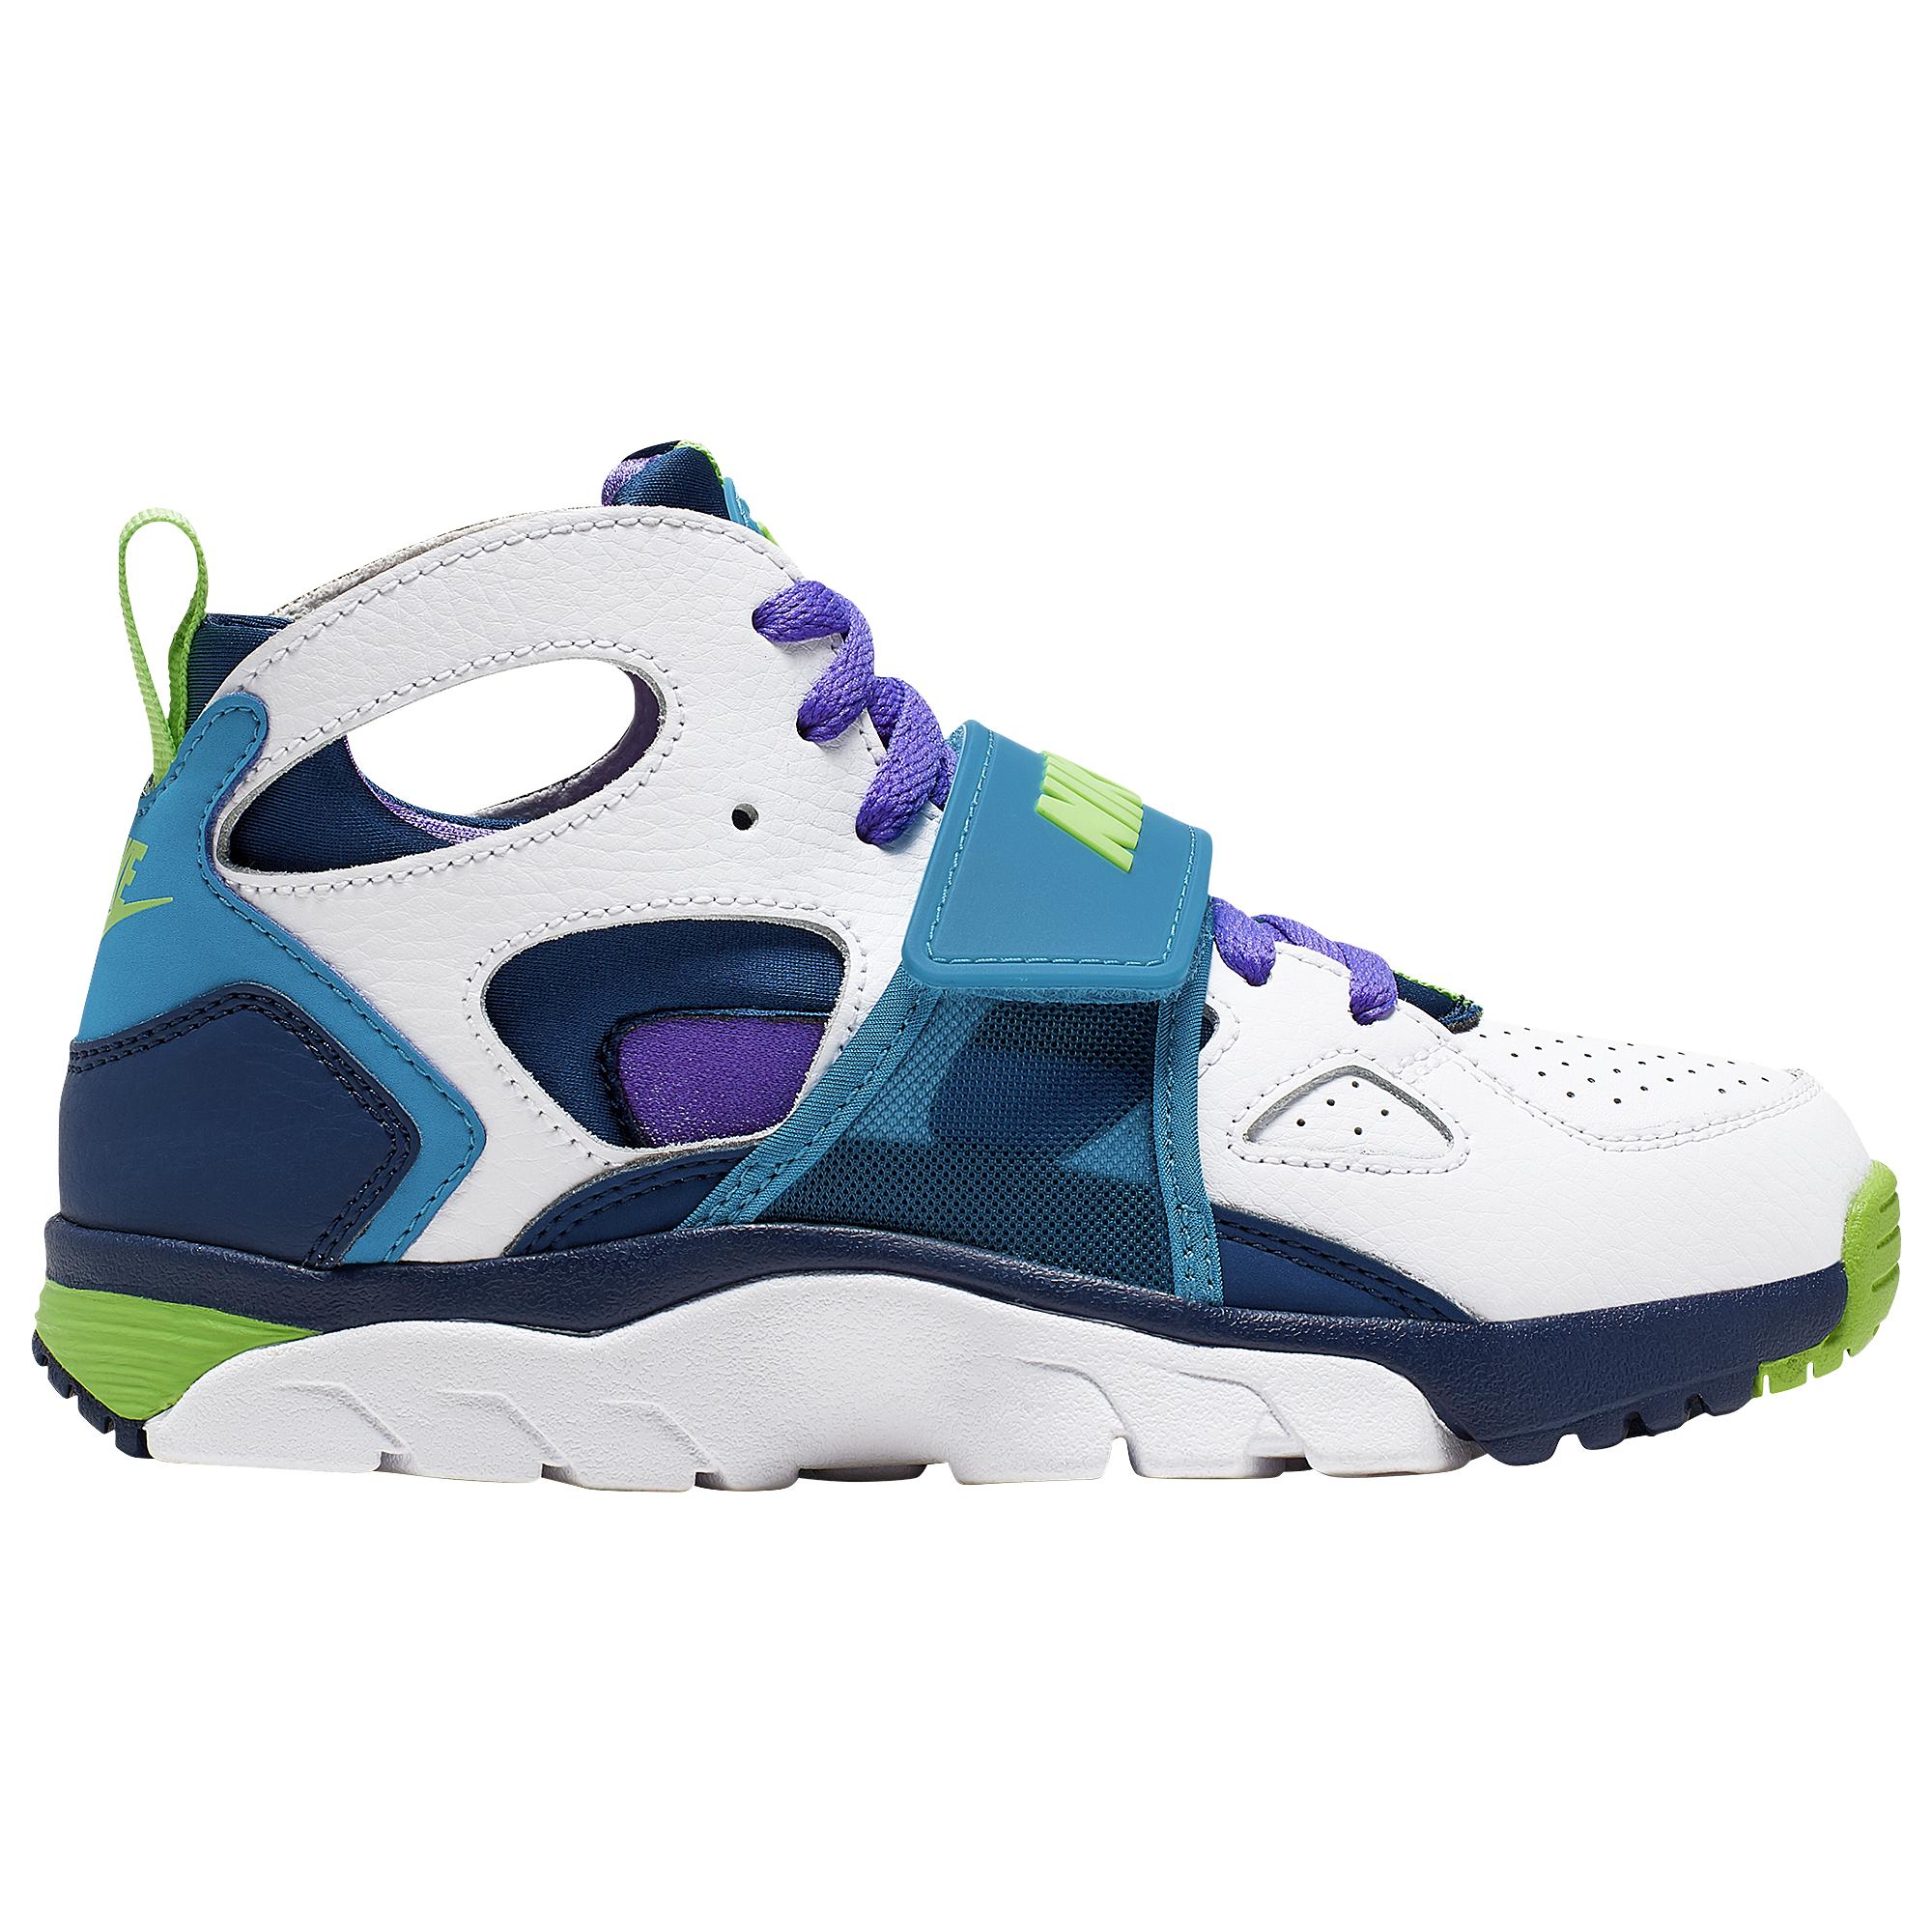 Nike Leather Trainer Huarache Training Shoes in Blue for Men - Lyst